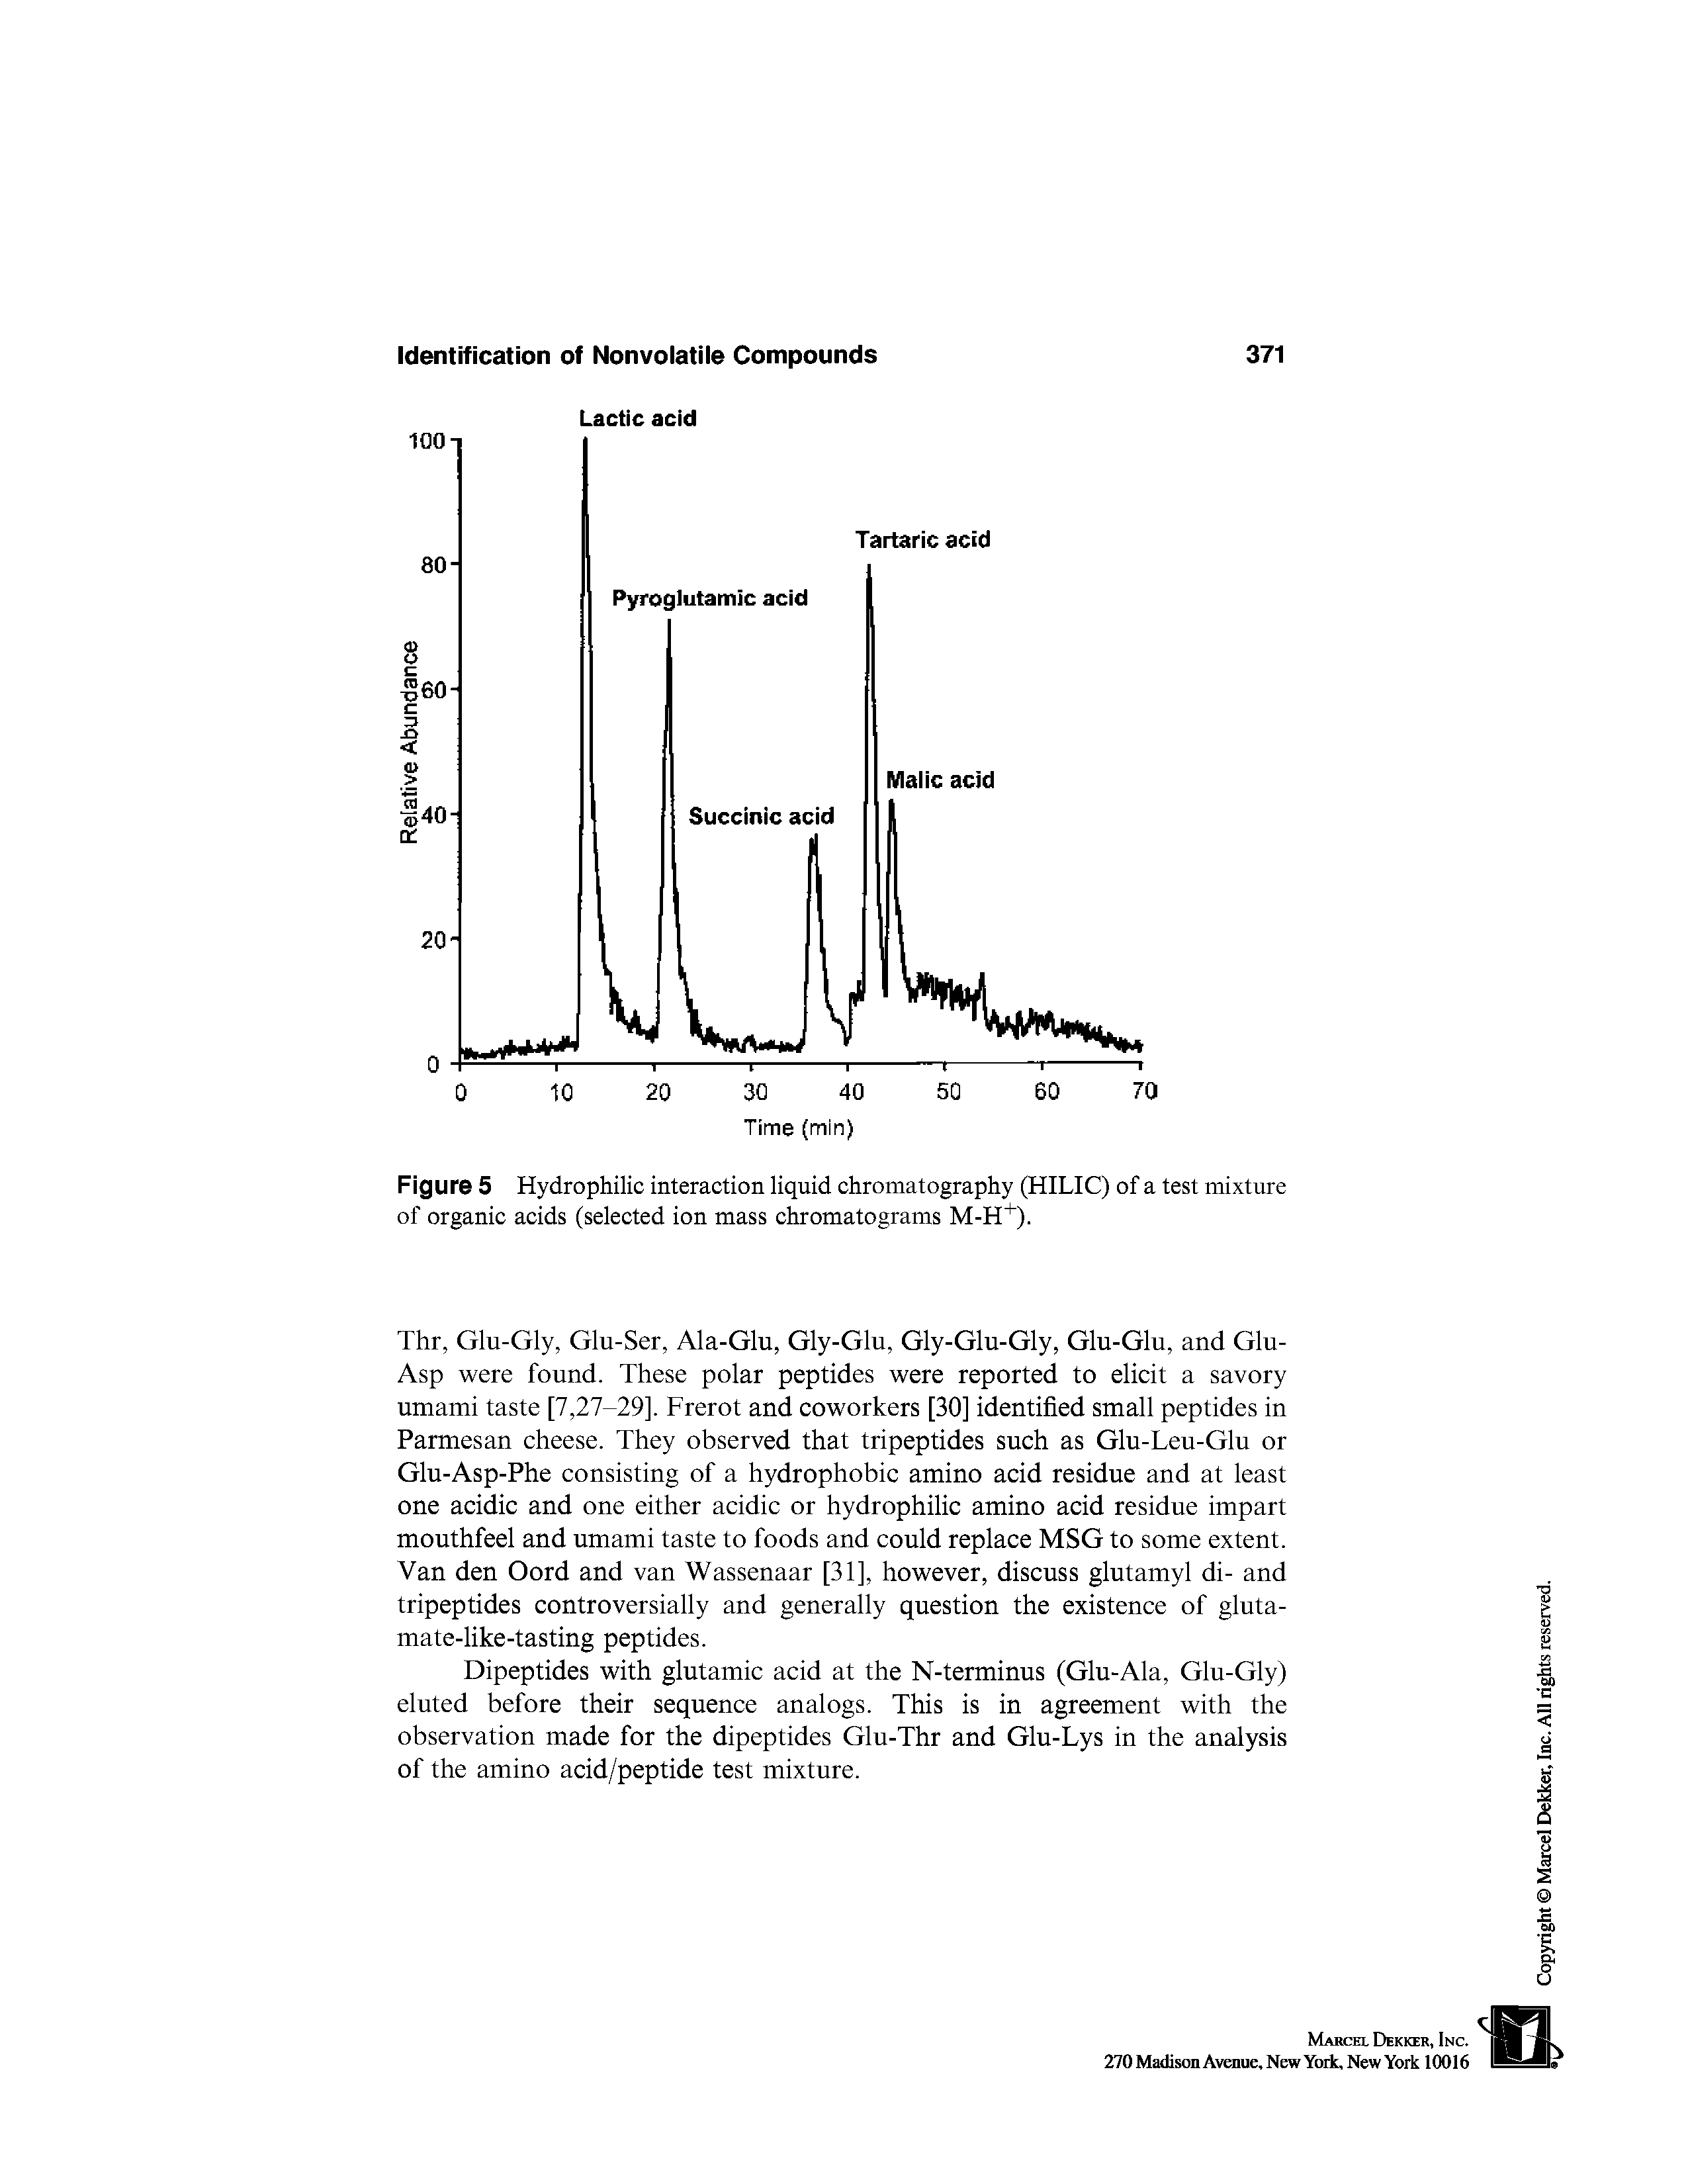 Figure 5 Hydrophilic interaction liquid chromatography (HILIC) of a test mixture of organic acids (selected ion mass chromatograms M-H ).